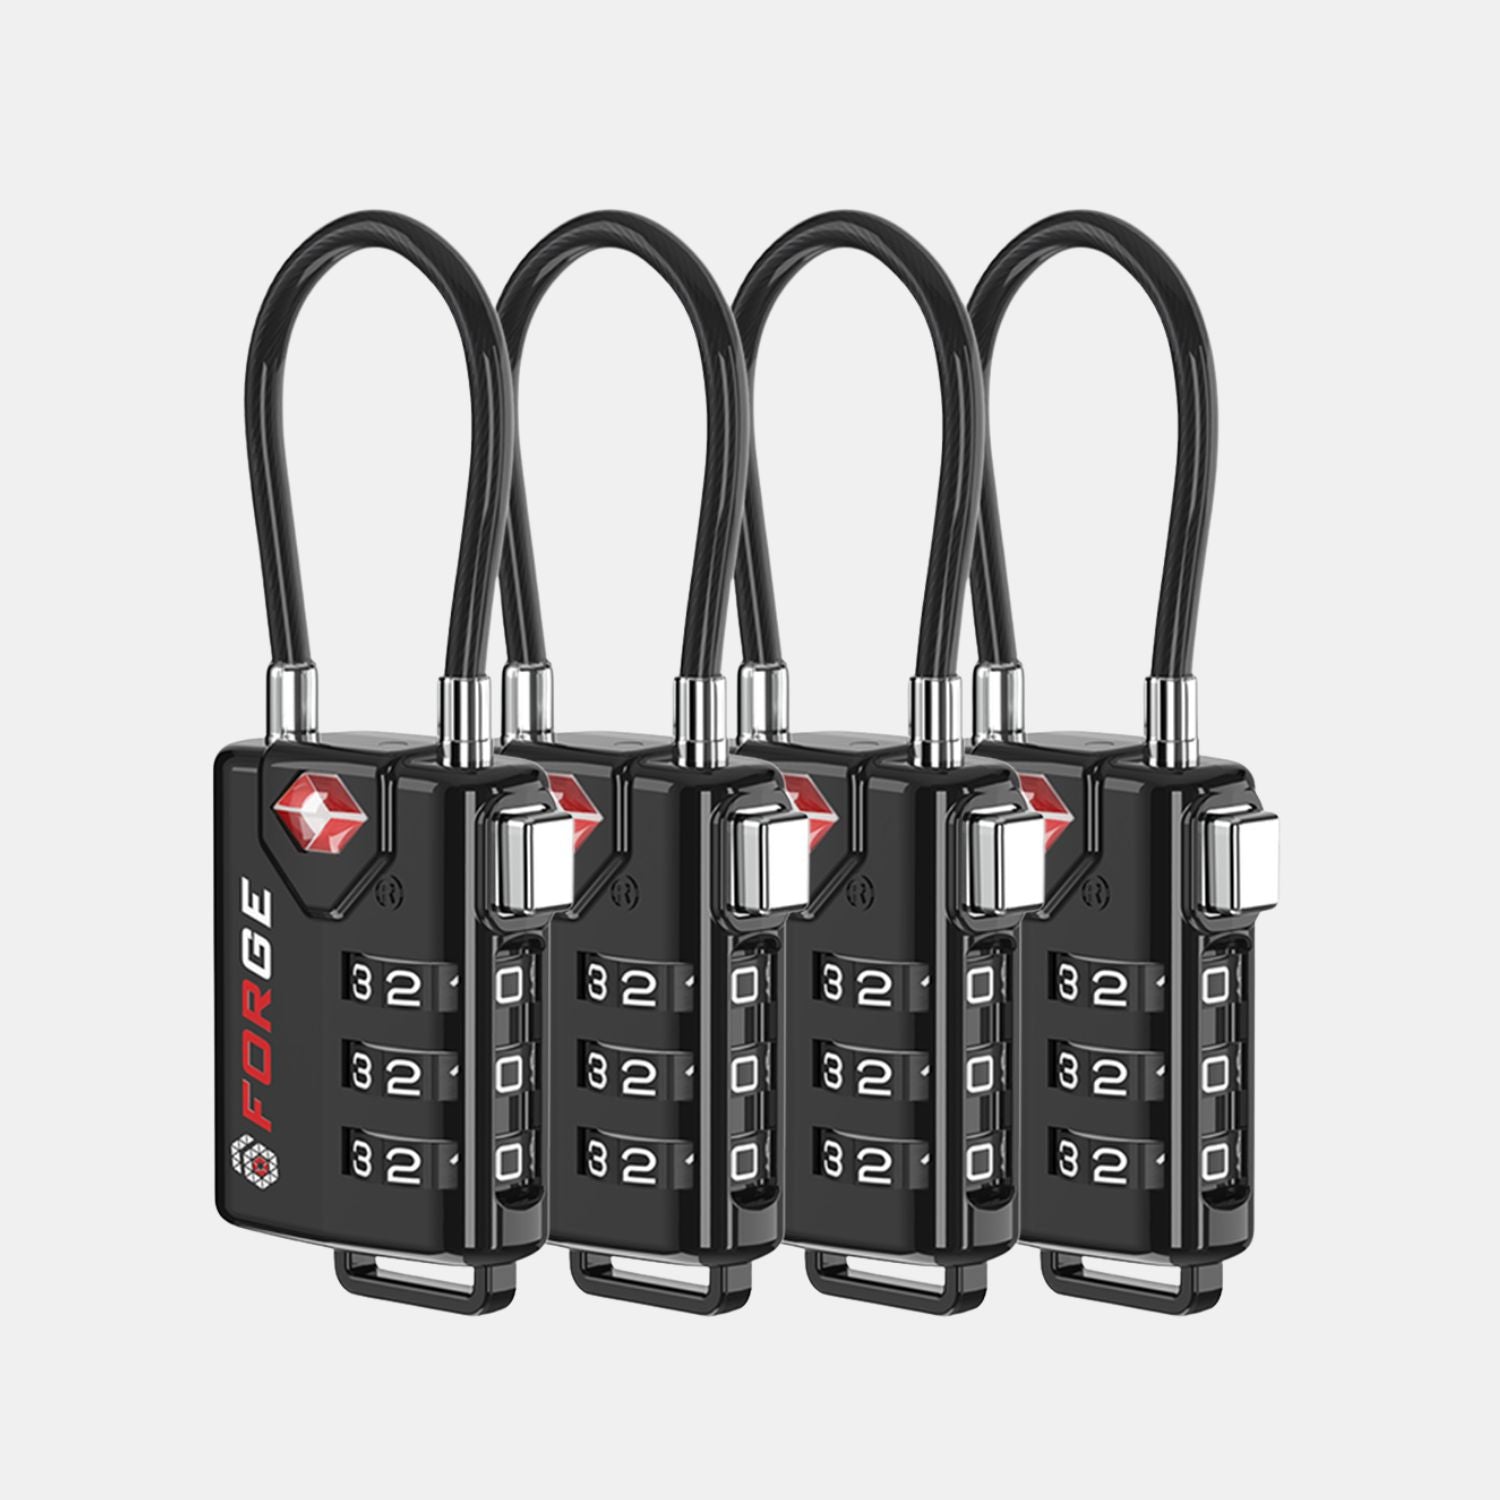 FORGE TSA Approved Cable Luggage Lock with Easy-to-Read Dials, Black 4 Locks